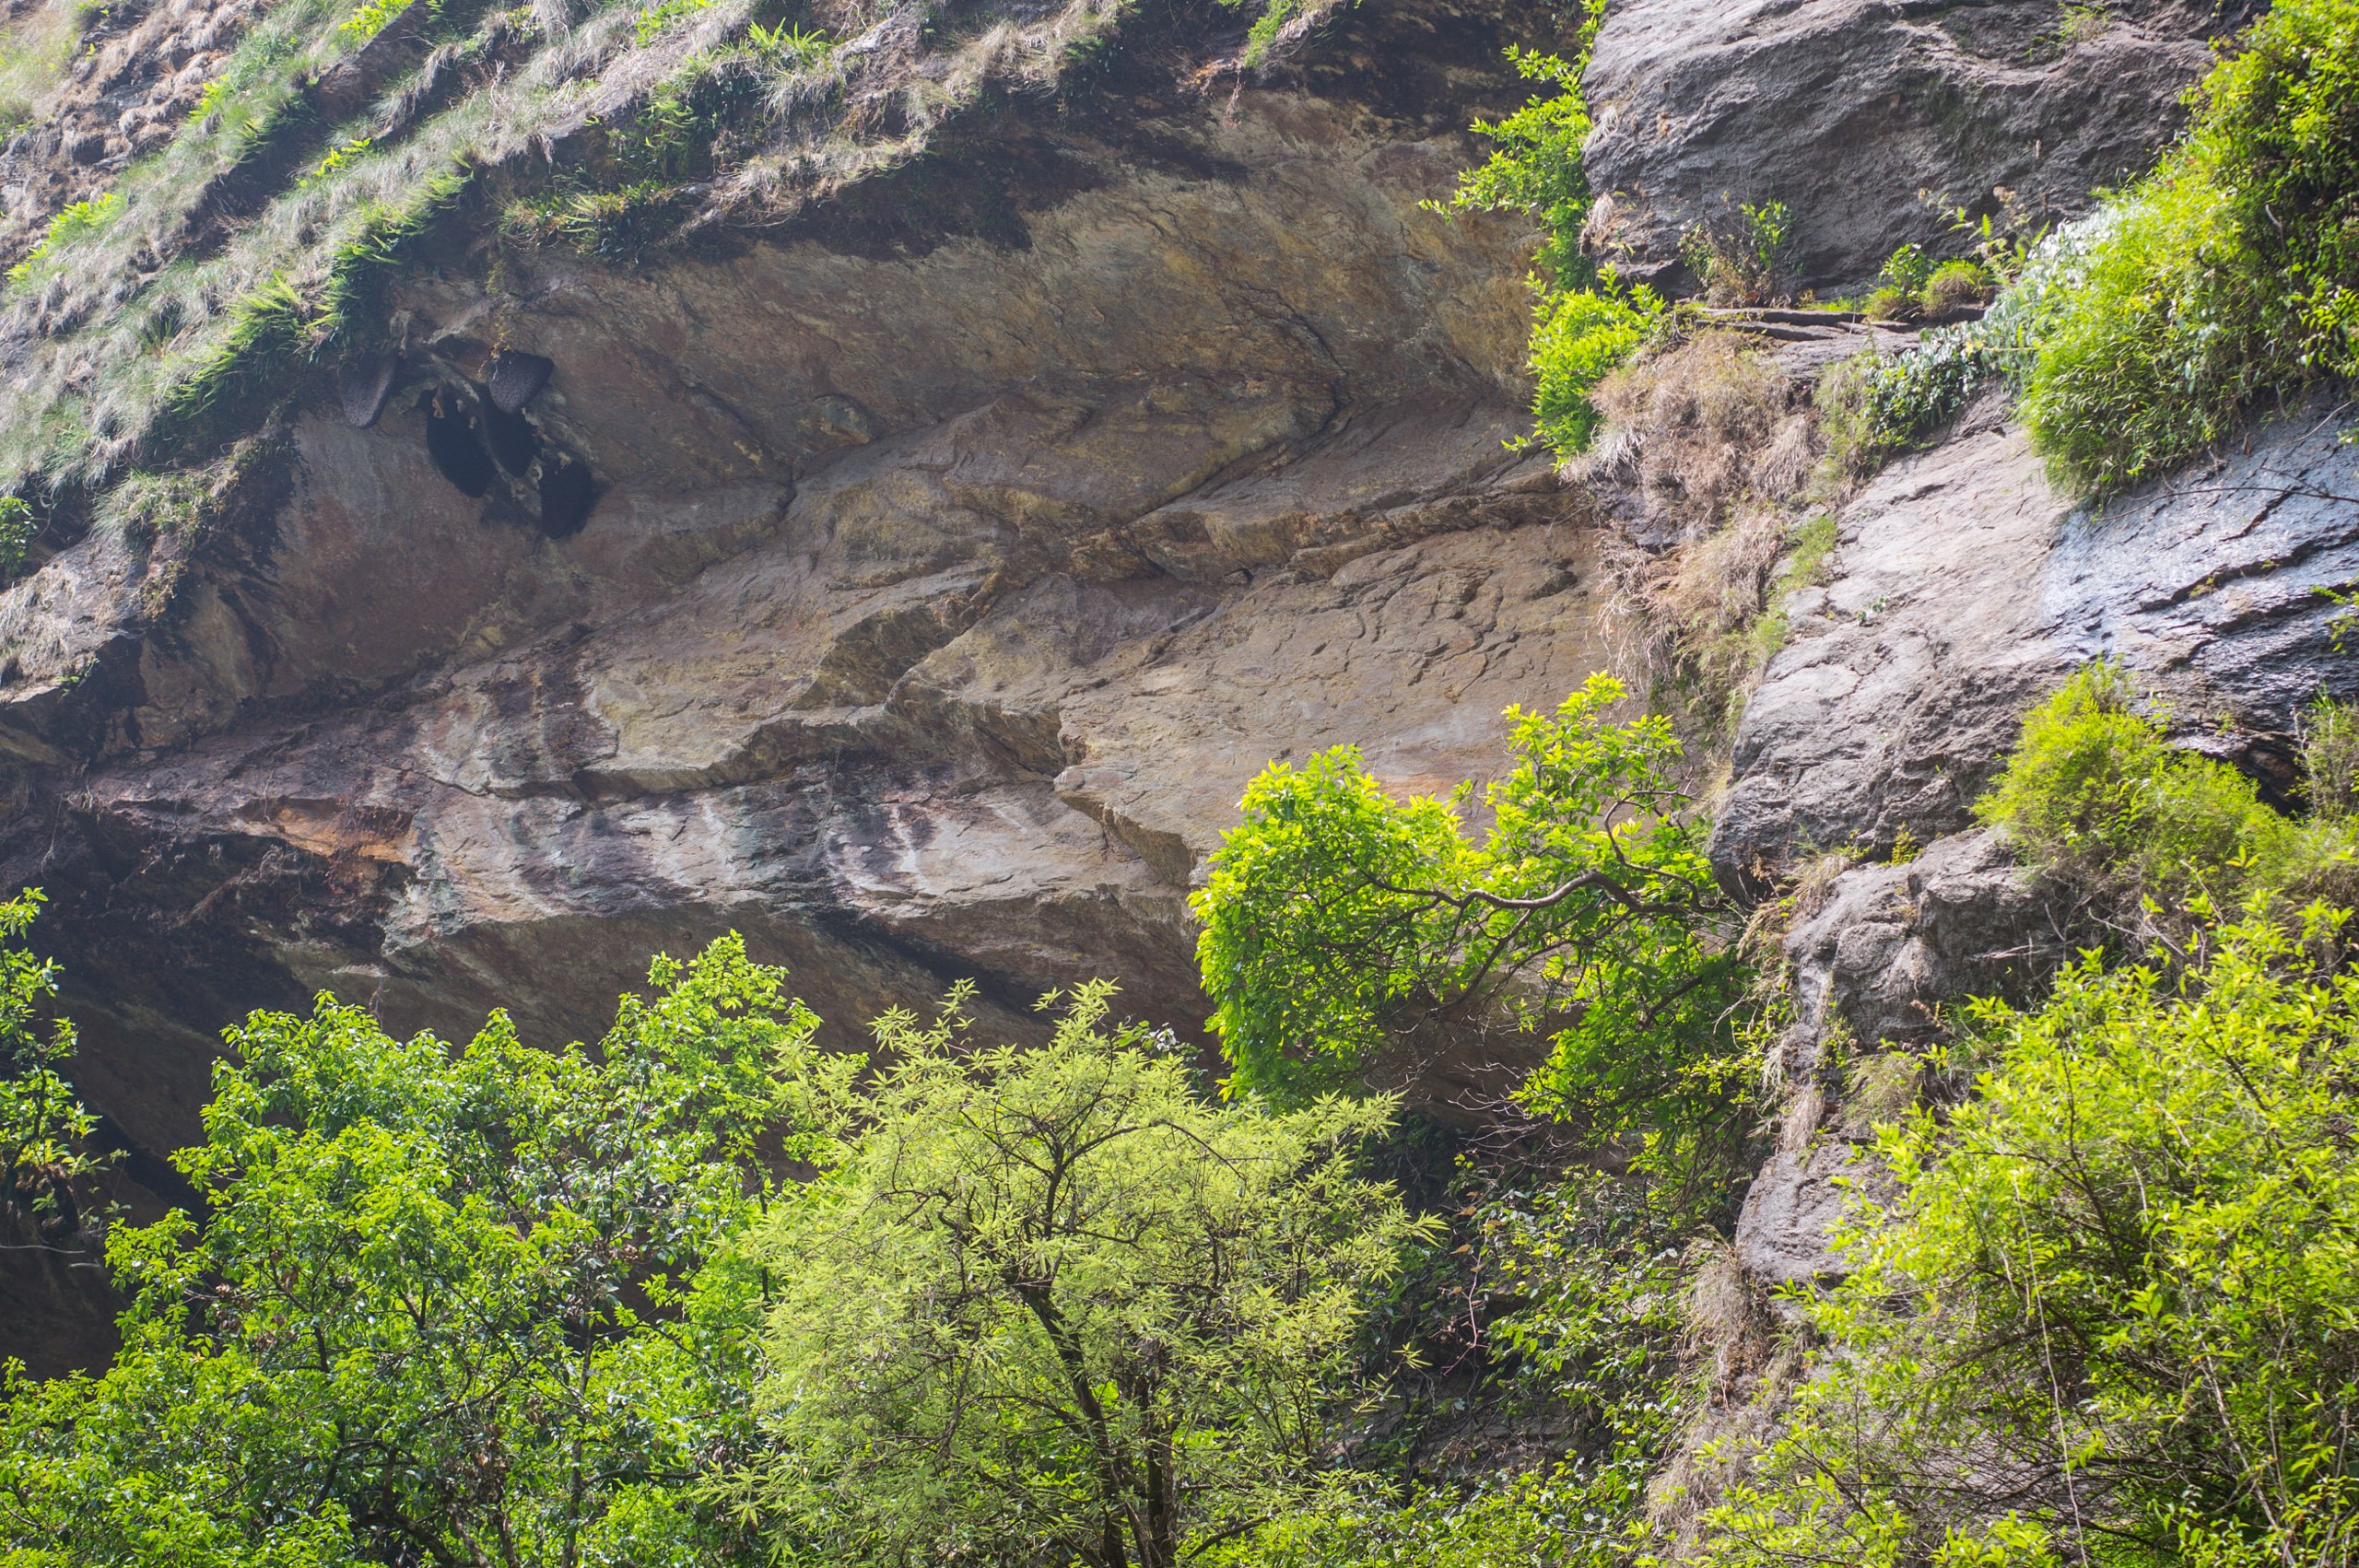 Five Himalayan giant honeybee nests (top left) tucked under an overhang in the Nyadi River gorge, central Nepal